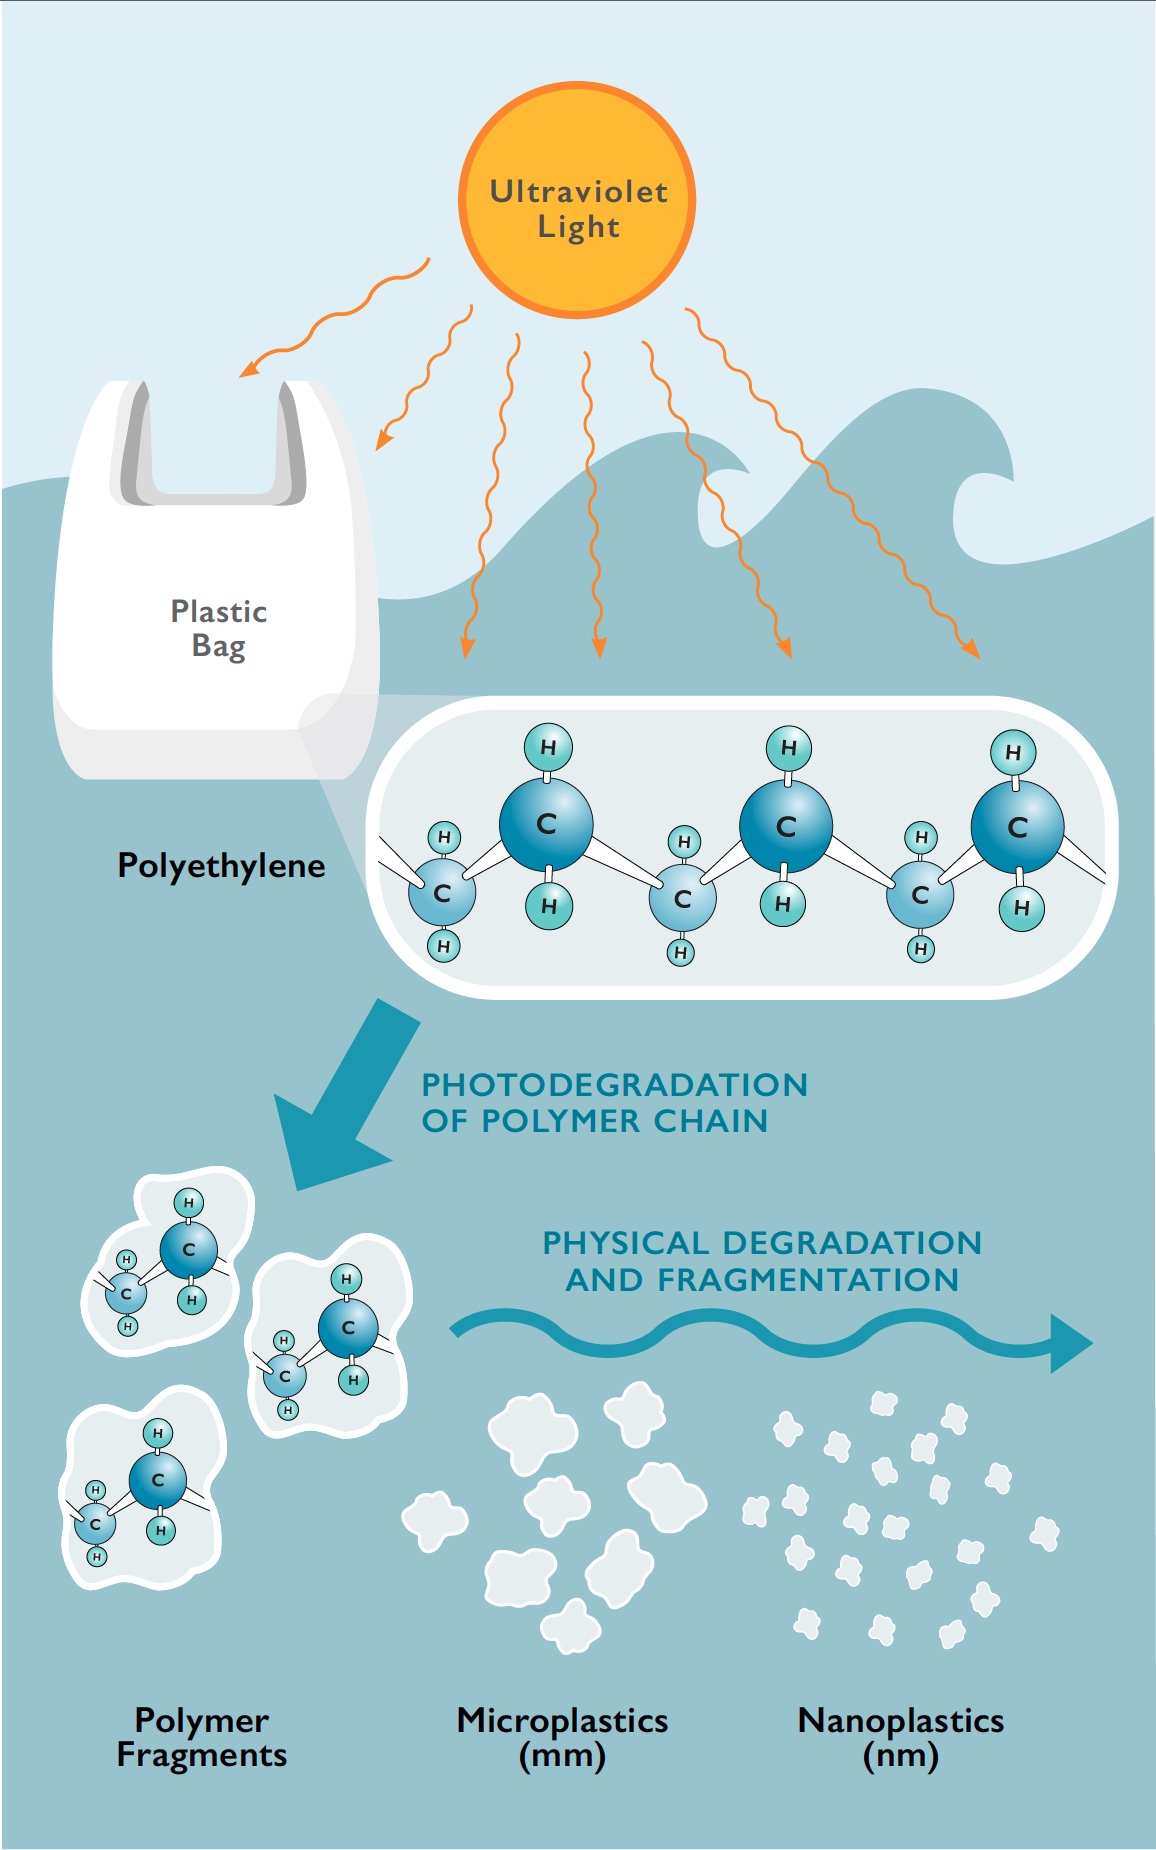 Graphic showing the breakdown of a plastic bag (comprised of Polyethylene) by ultraviolet light from the sun. The steps of degradation are: 1-Photodegradation of polymer chains. 2-Physical degradation and fragmentation. These forces of degradation break the plastic down to polymer fragments, then microplastics (measured in millemeters), and finally to nanoplastics (measured in nanometers).